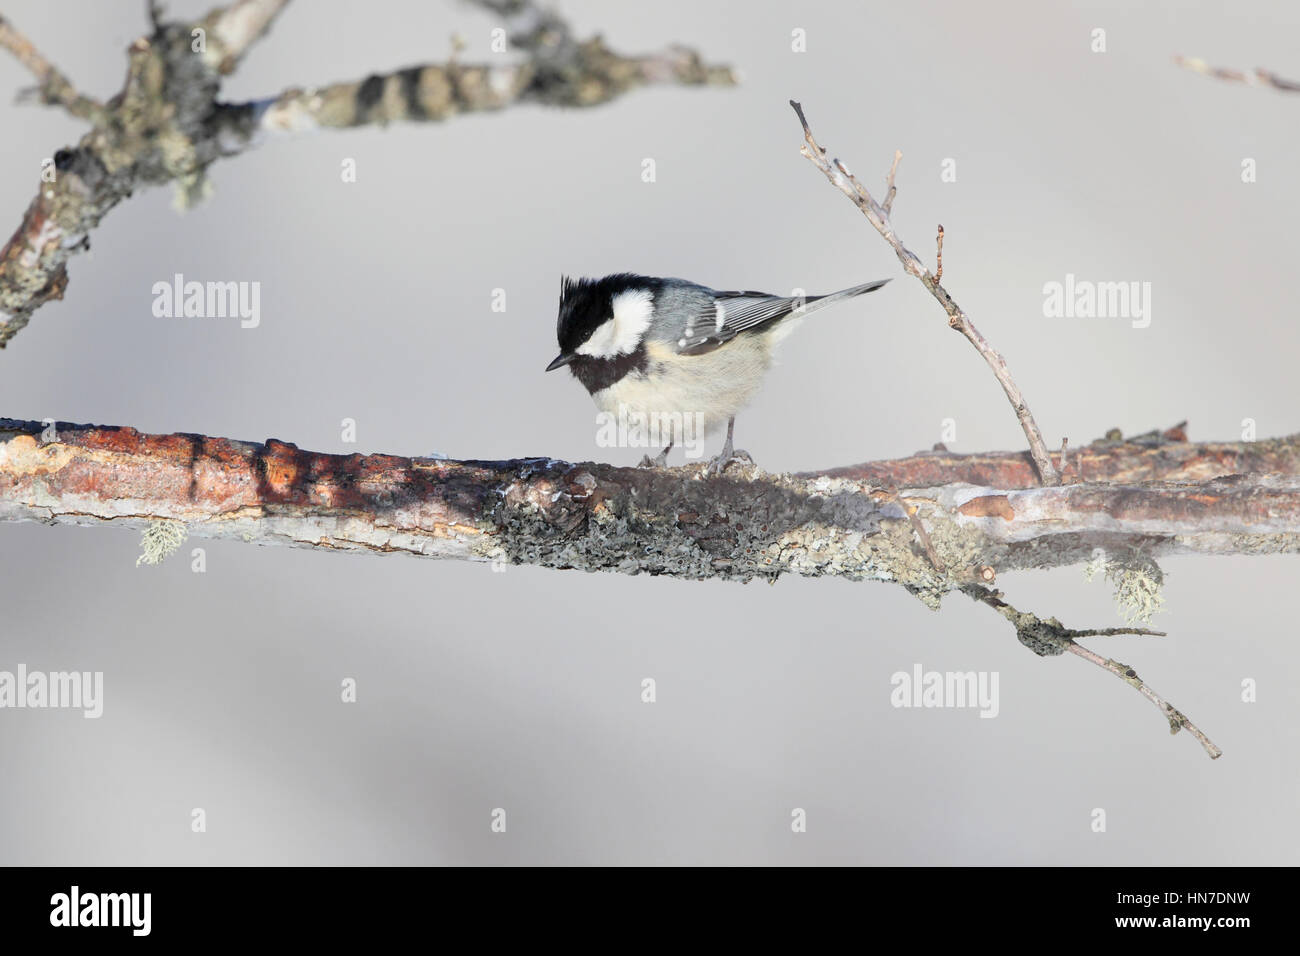 Coal Tit (Periparus ater insularis) - a bird feeding on a lichen-covered branch against a wintry, snowy grey-white background, in Hokkaido, Japan Stock Photo